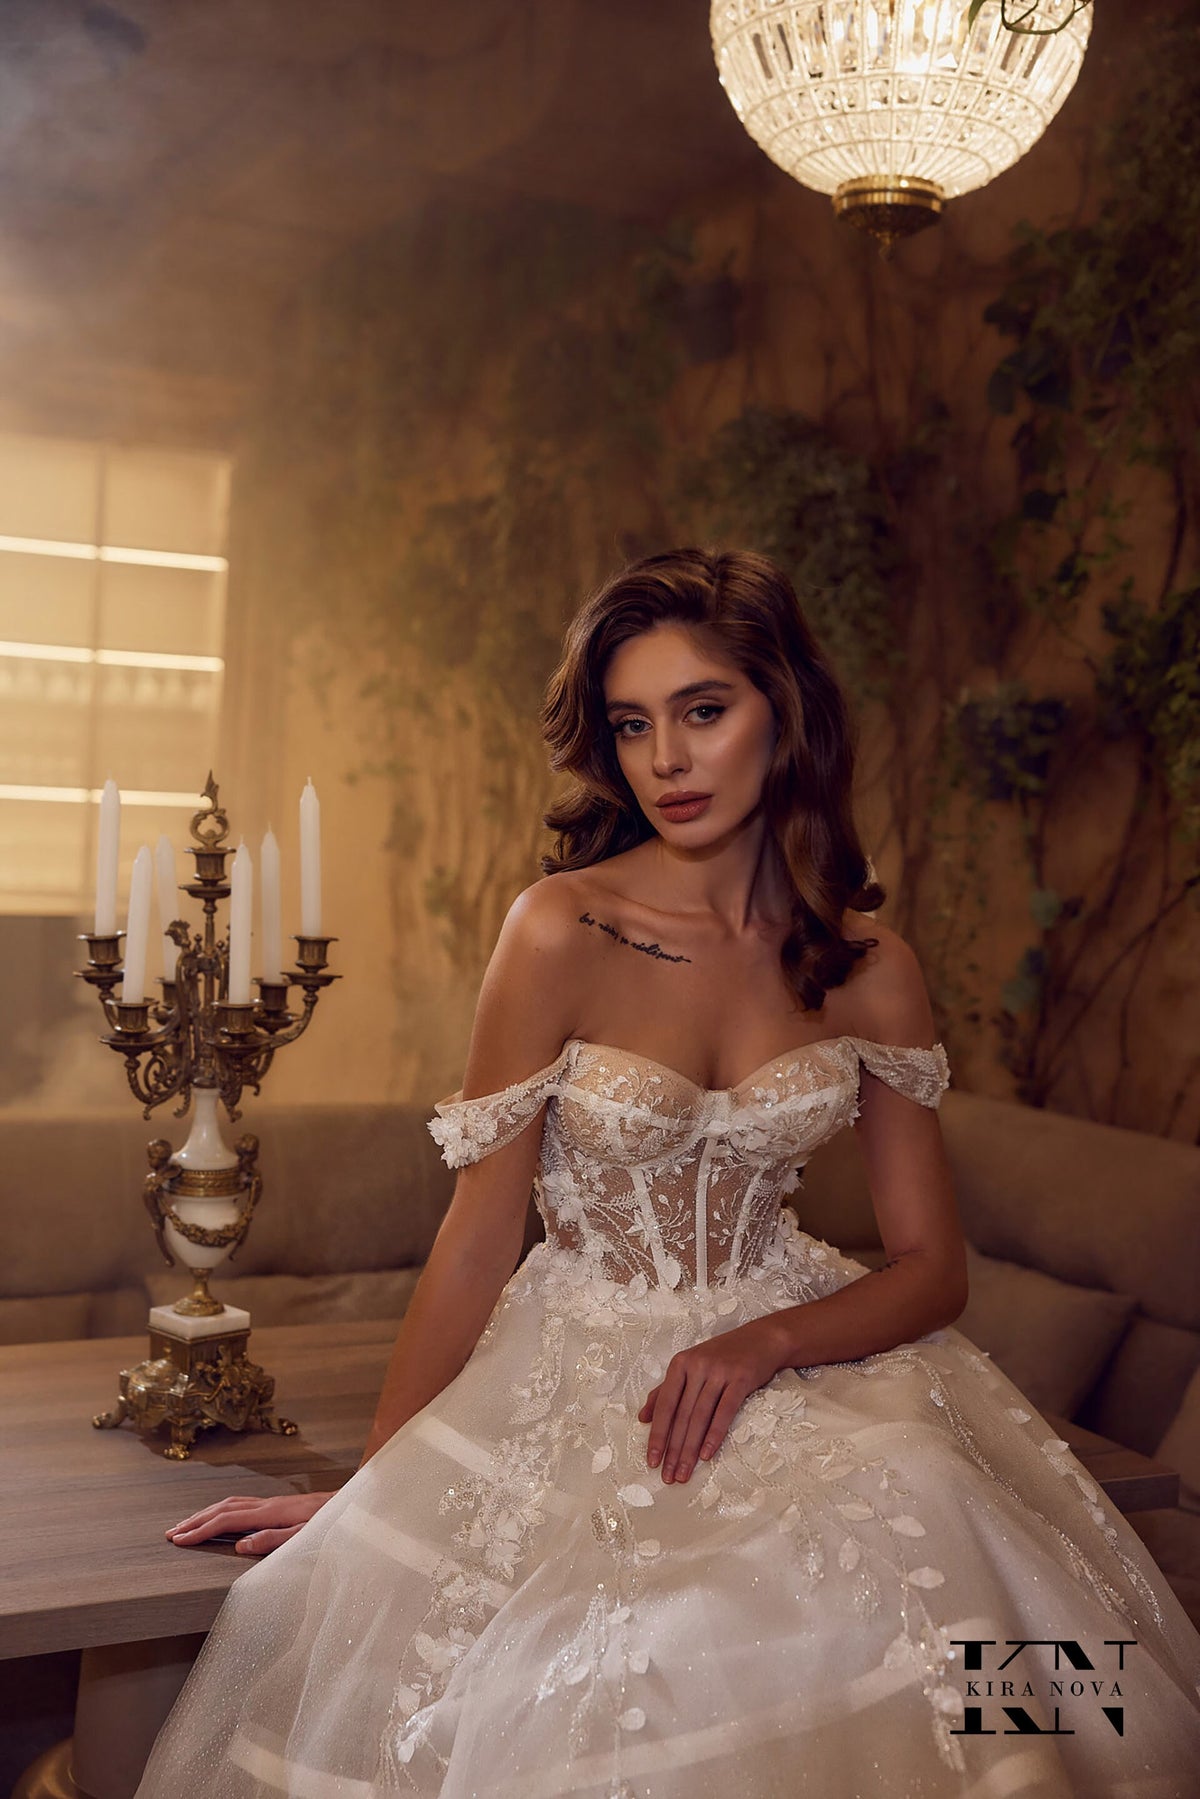 Unique Ball Gown Wedding Dress Bustier Bodice Off the Shoulder Sleeves Sweetheart Neckline Corset Top Sparkle Bridal Gown Open Back Lace